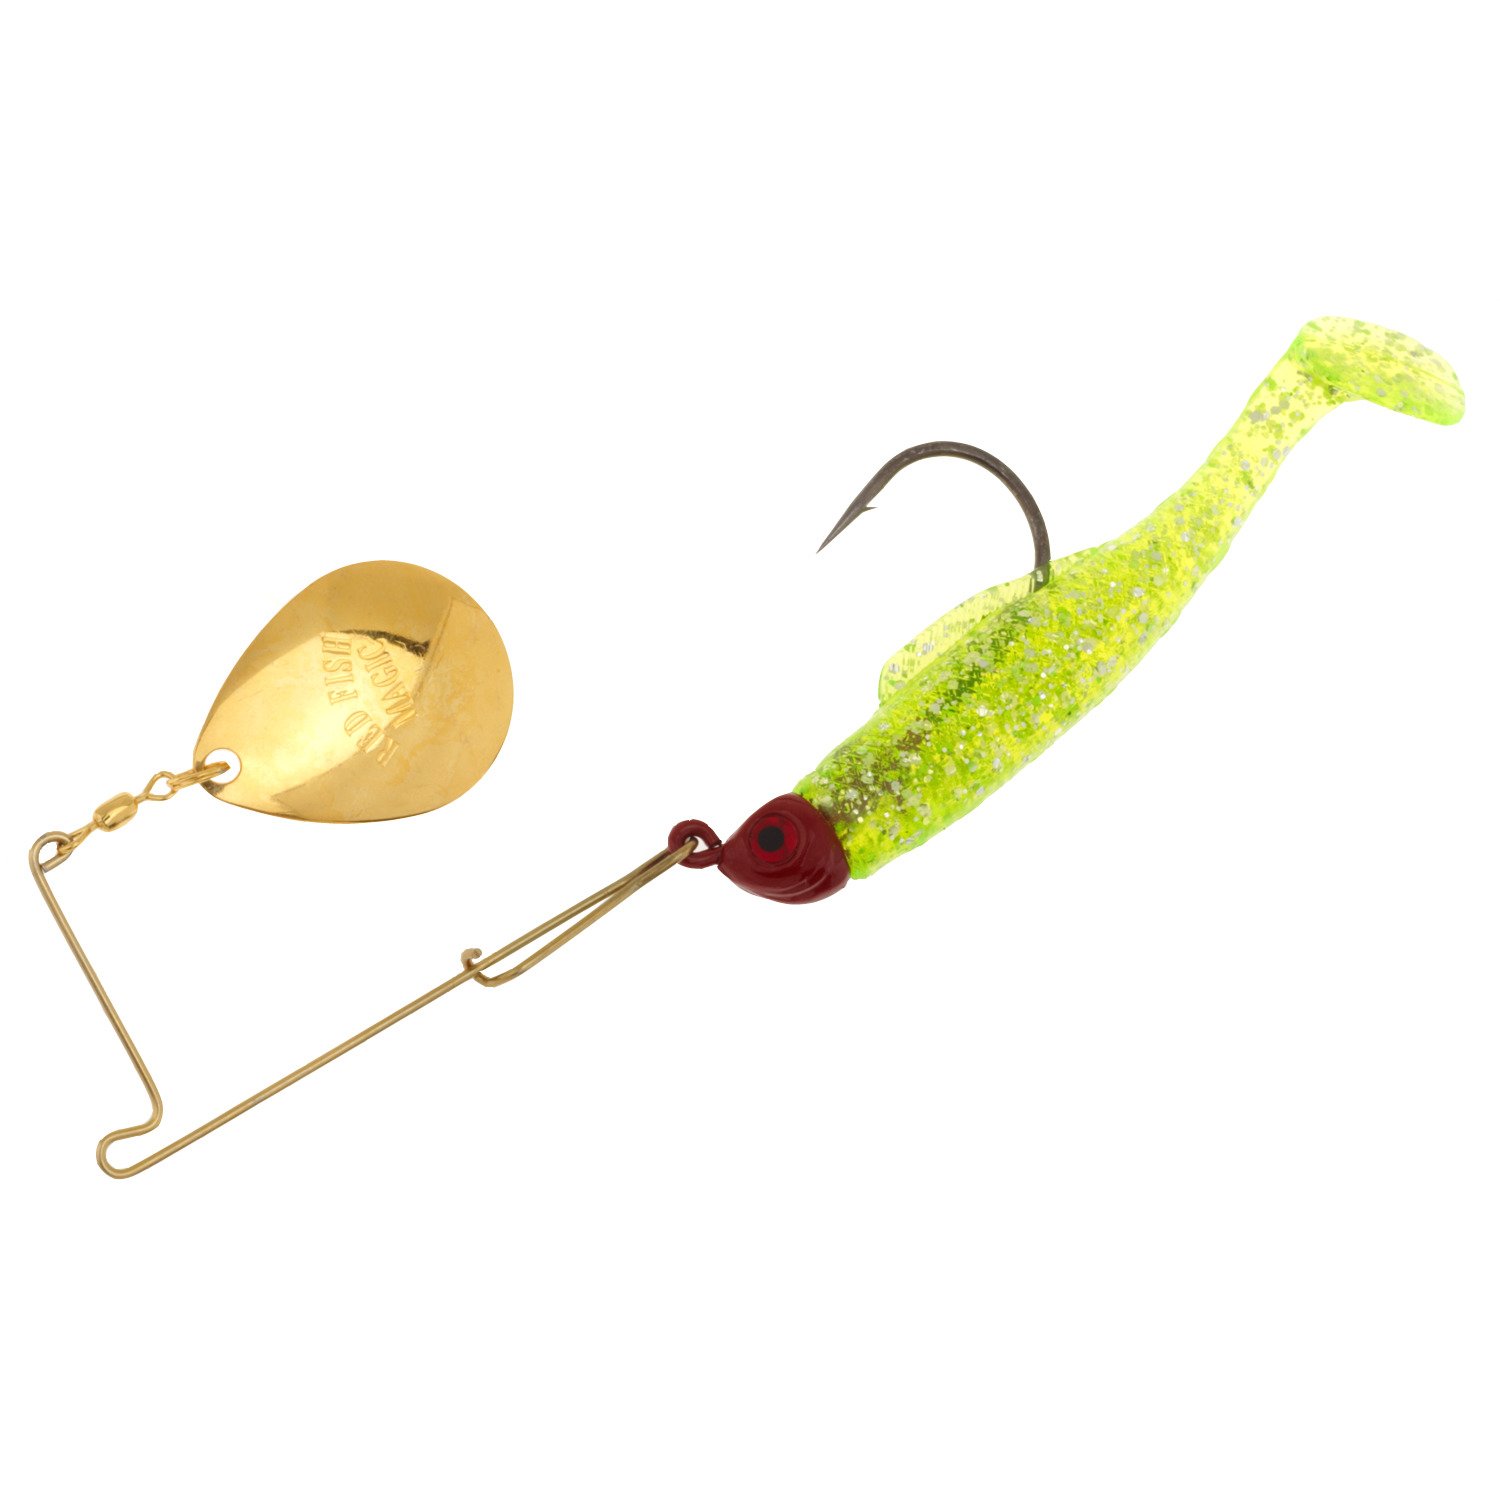  Strike King Redfish Magic Saltwater Spinnerbait, Watermelon  Chartreuse Tail/red Head, 1/4oz (RMG14-817) : Artificial Fishing Bait :  Sports & Outdoors